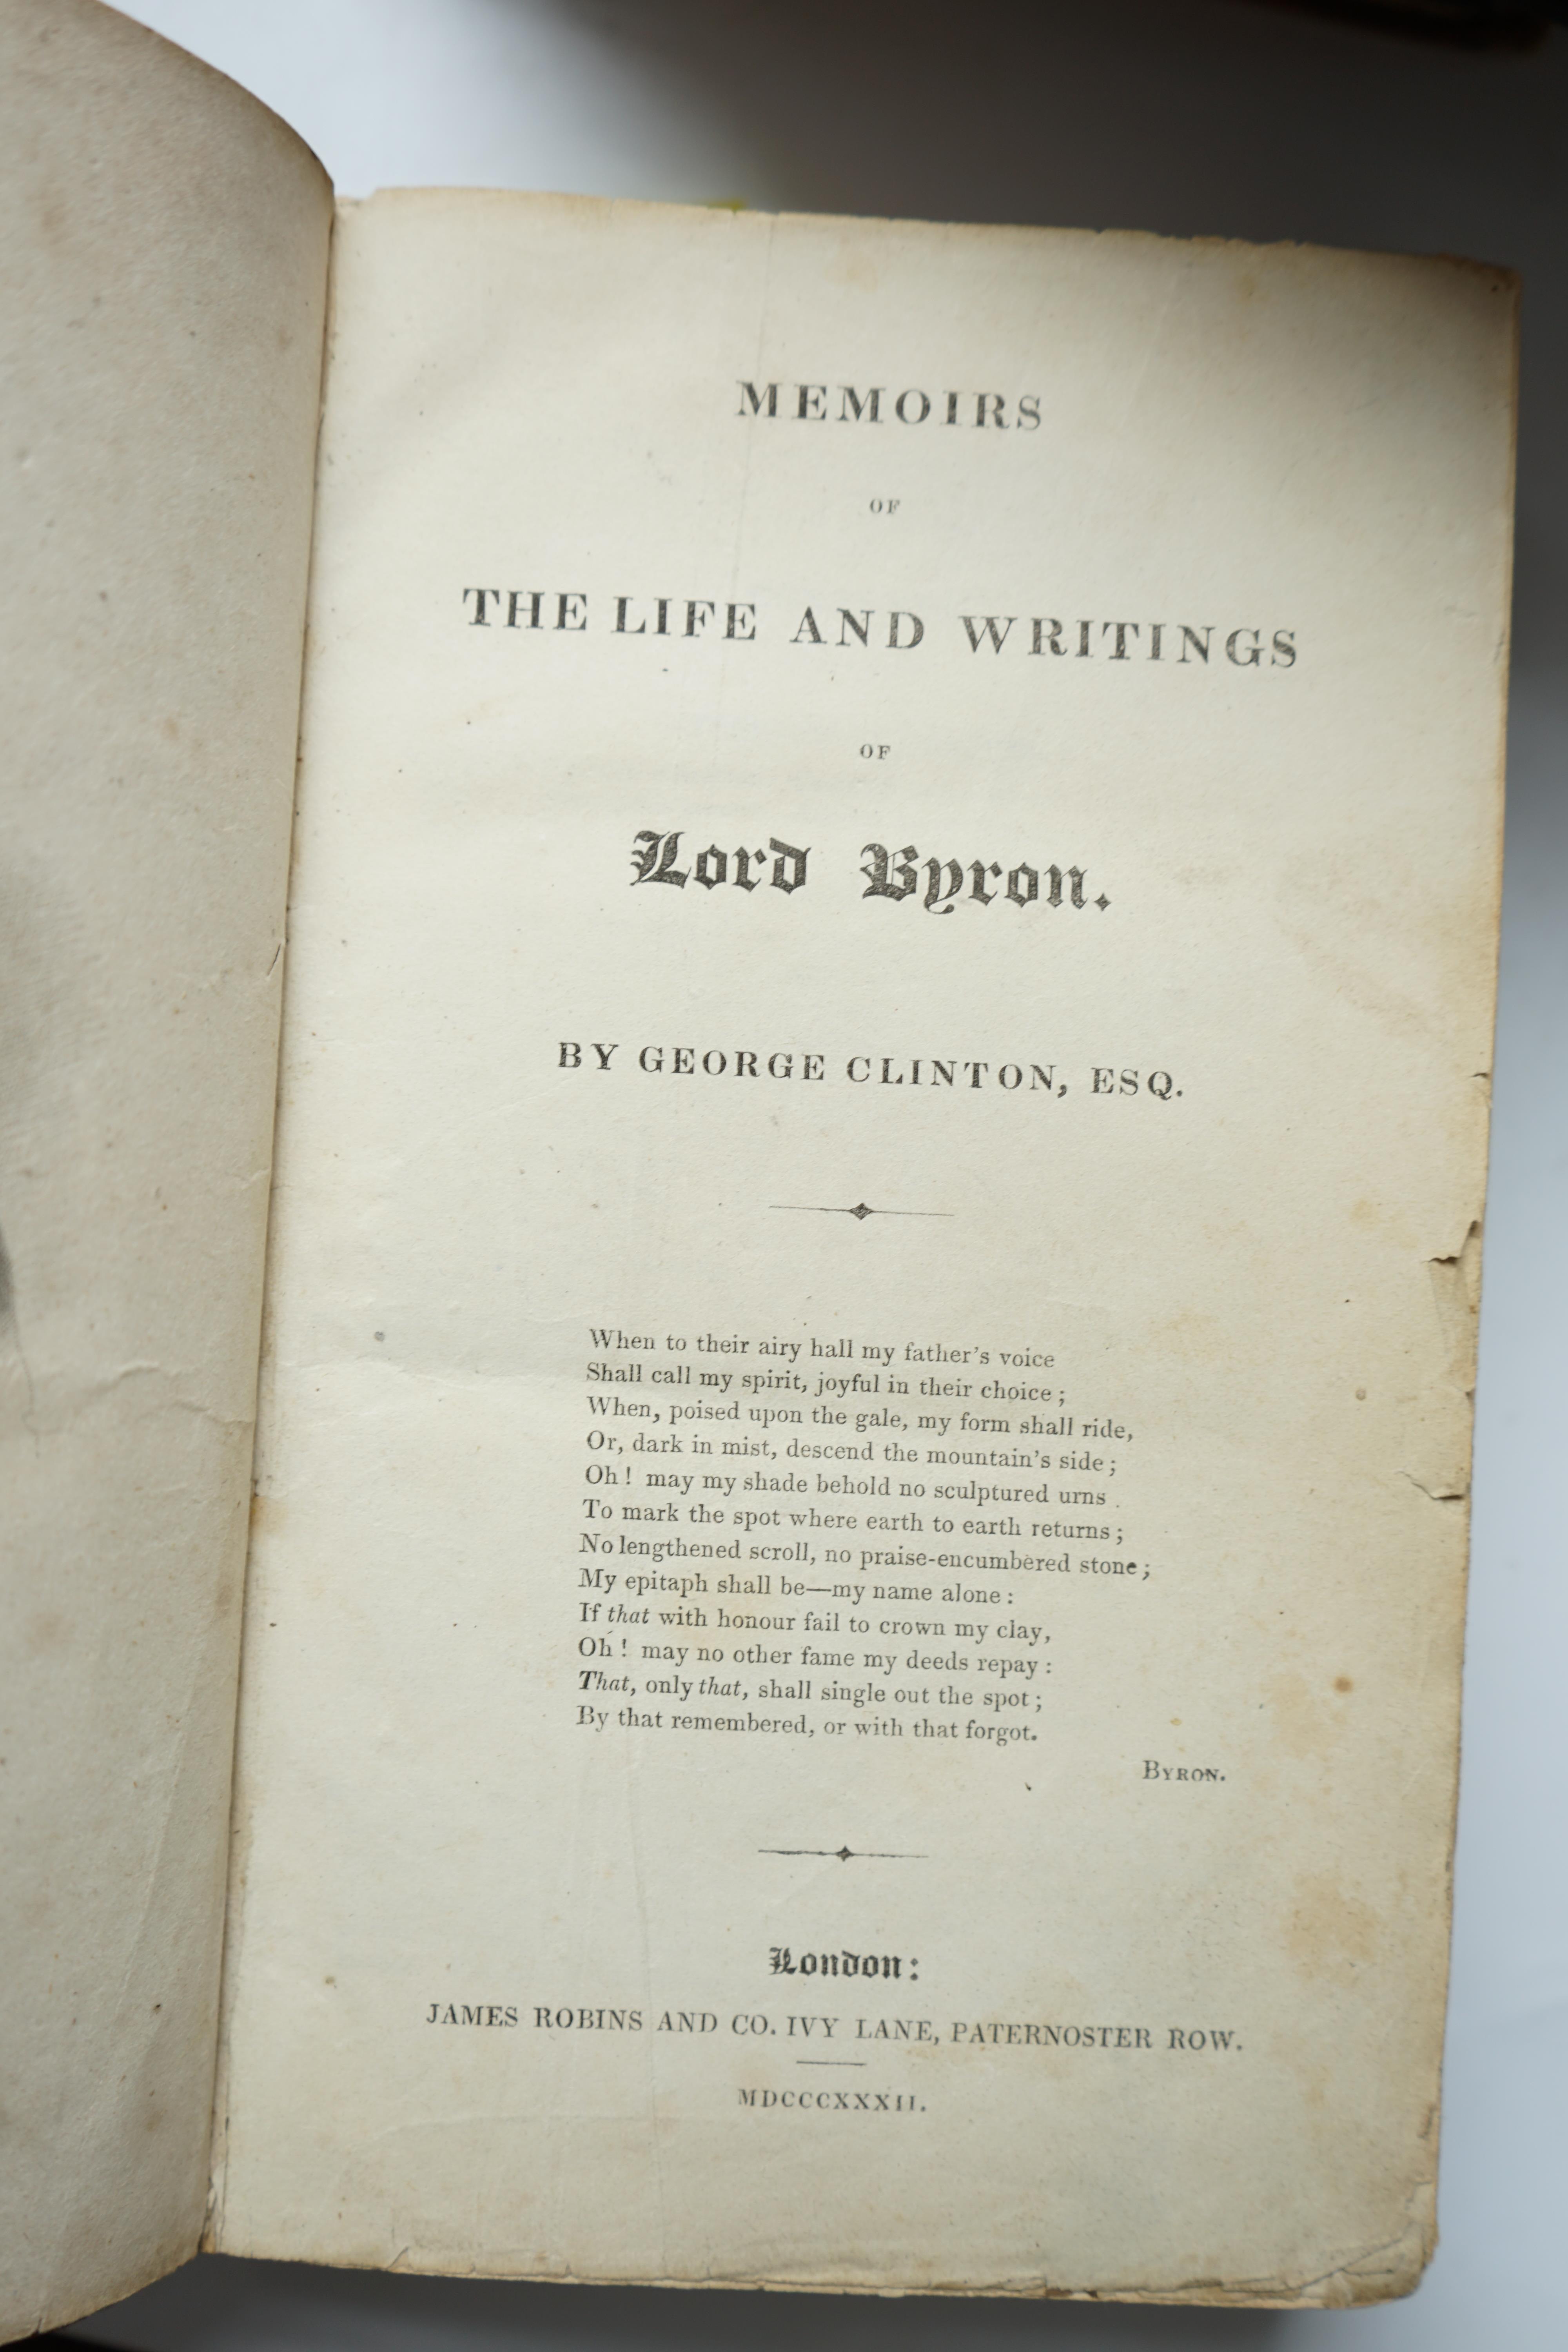 Clinton, George - Memoirs of the Life and Writings of Lord Byron, calf rebacked, 1832; The Poetical Works of Lord Byron with life engravings in steel, (The Landscape Edition of Poets), Gall & Inglis, nd; Dallas, R.C - Co